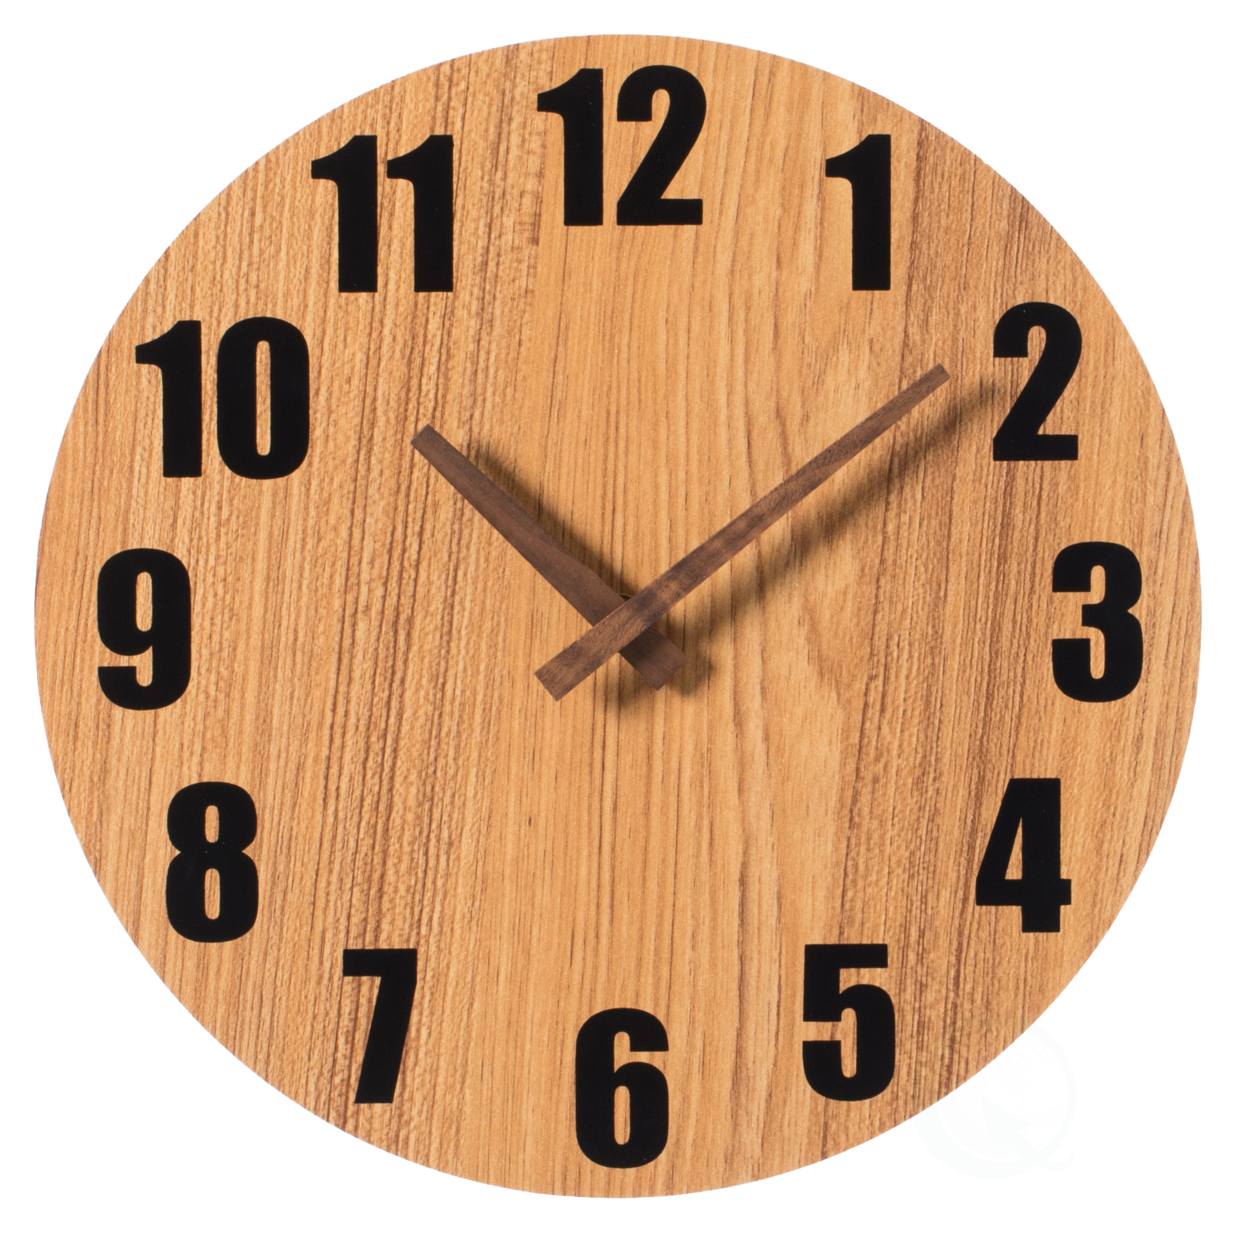 Antique Home Decor Wall Clock For Living Room, Bedroom, Kitchen, Or Dining Room Light Brown Natural Wood